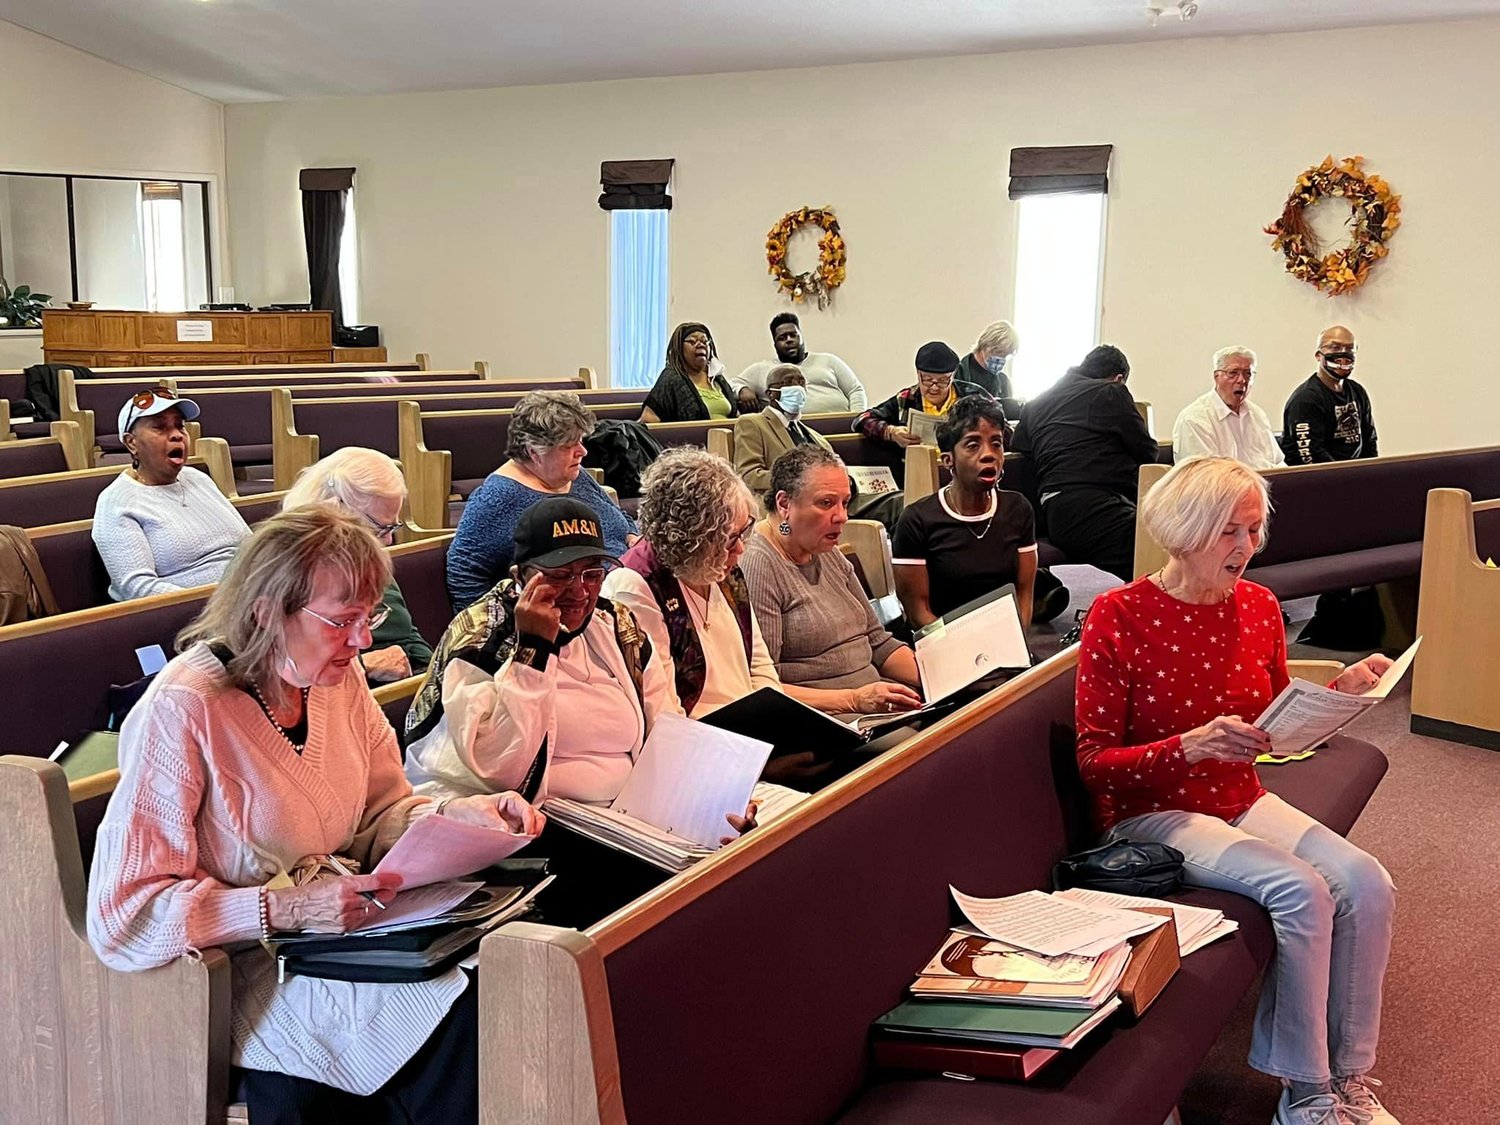 Members of the Earl Nelson Singers have prepared some of their favorite songs for its farewell concert, 3 p.m. Sunday at Friendship Baptist Church in Lansing. “It’s really a goodbye to the community and the end of a wonderful 60 years of singing together,” said President Mary Anne Larzelere.